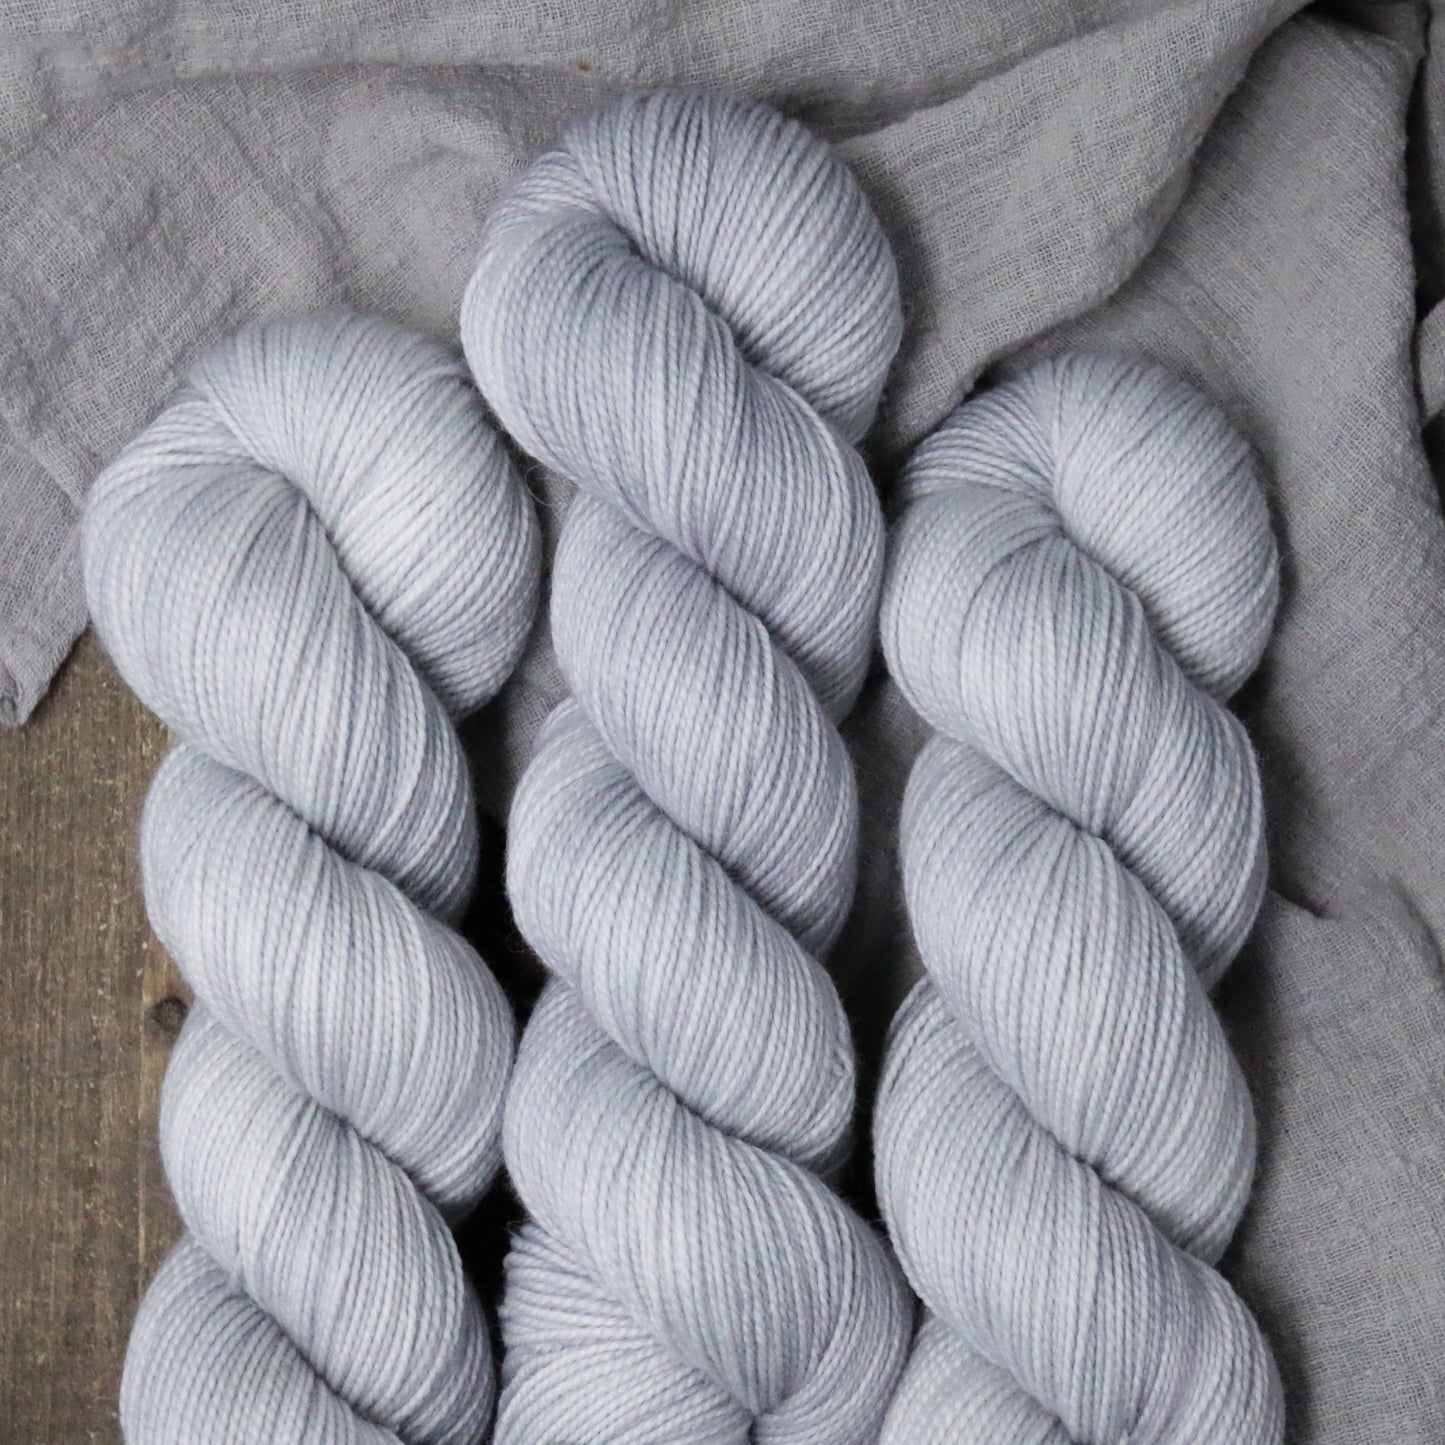 Elder - Sweater Quantity and Dyed to Order